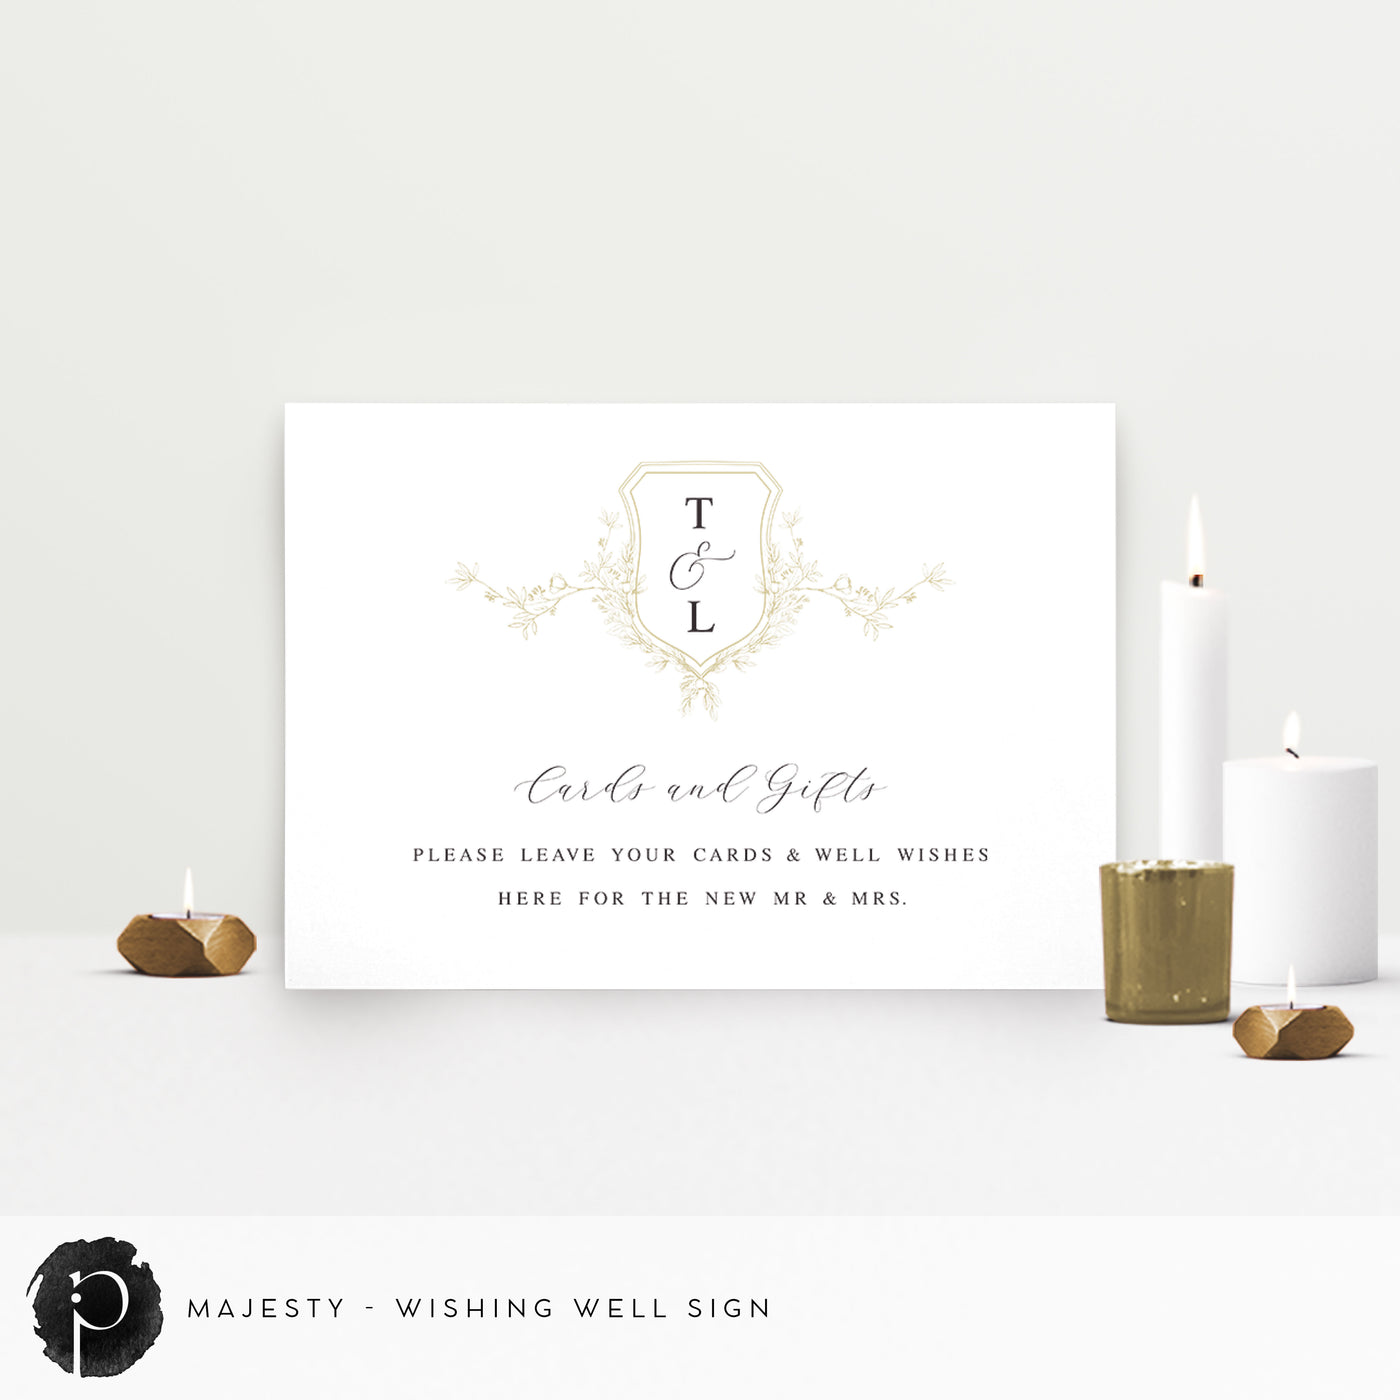 Majesty - Cards/Gifts/Presents/Wishing Well Table Sign